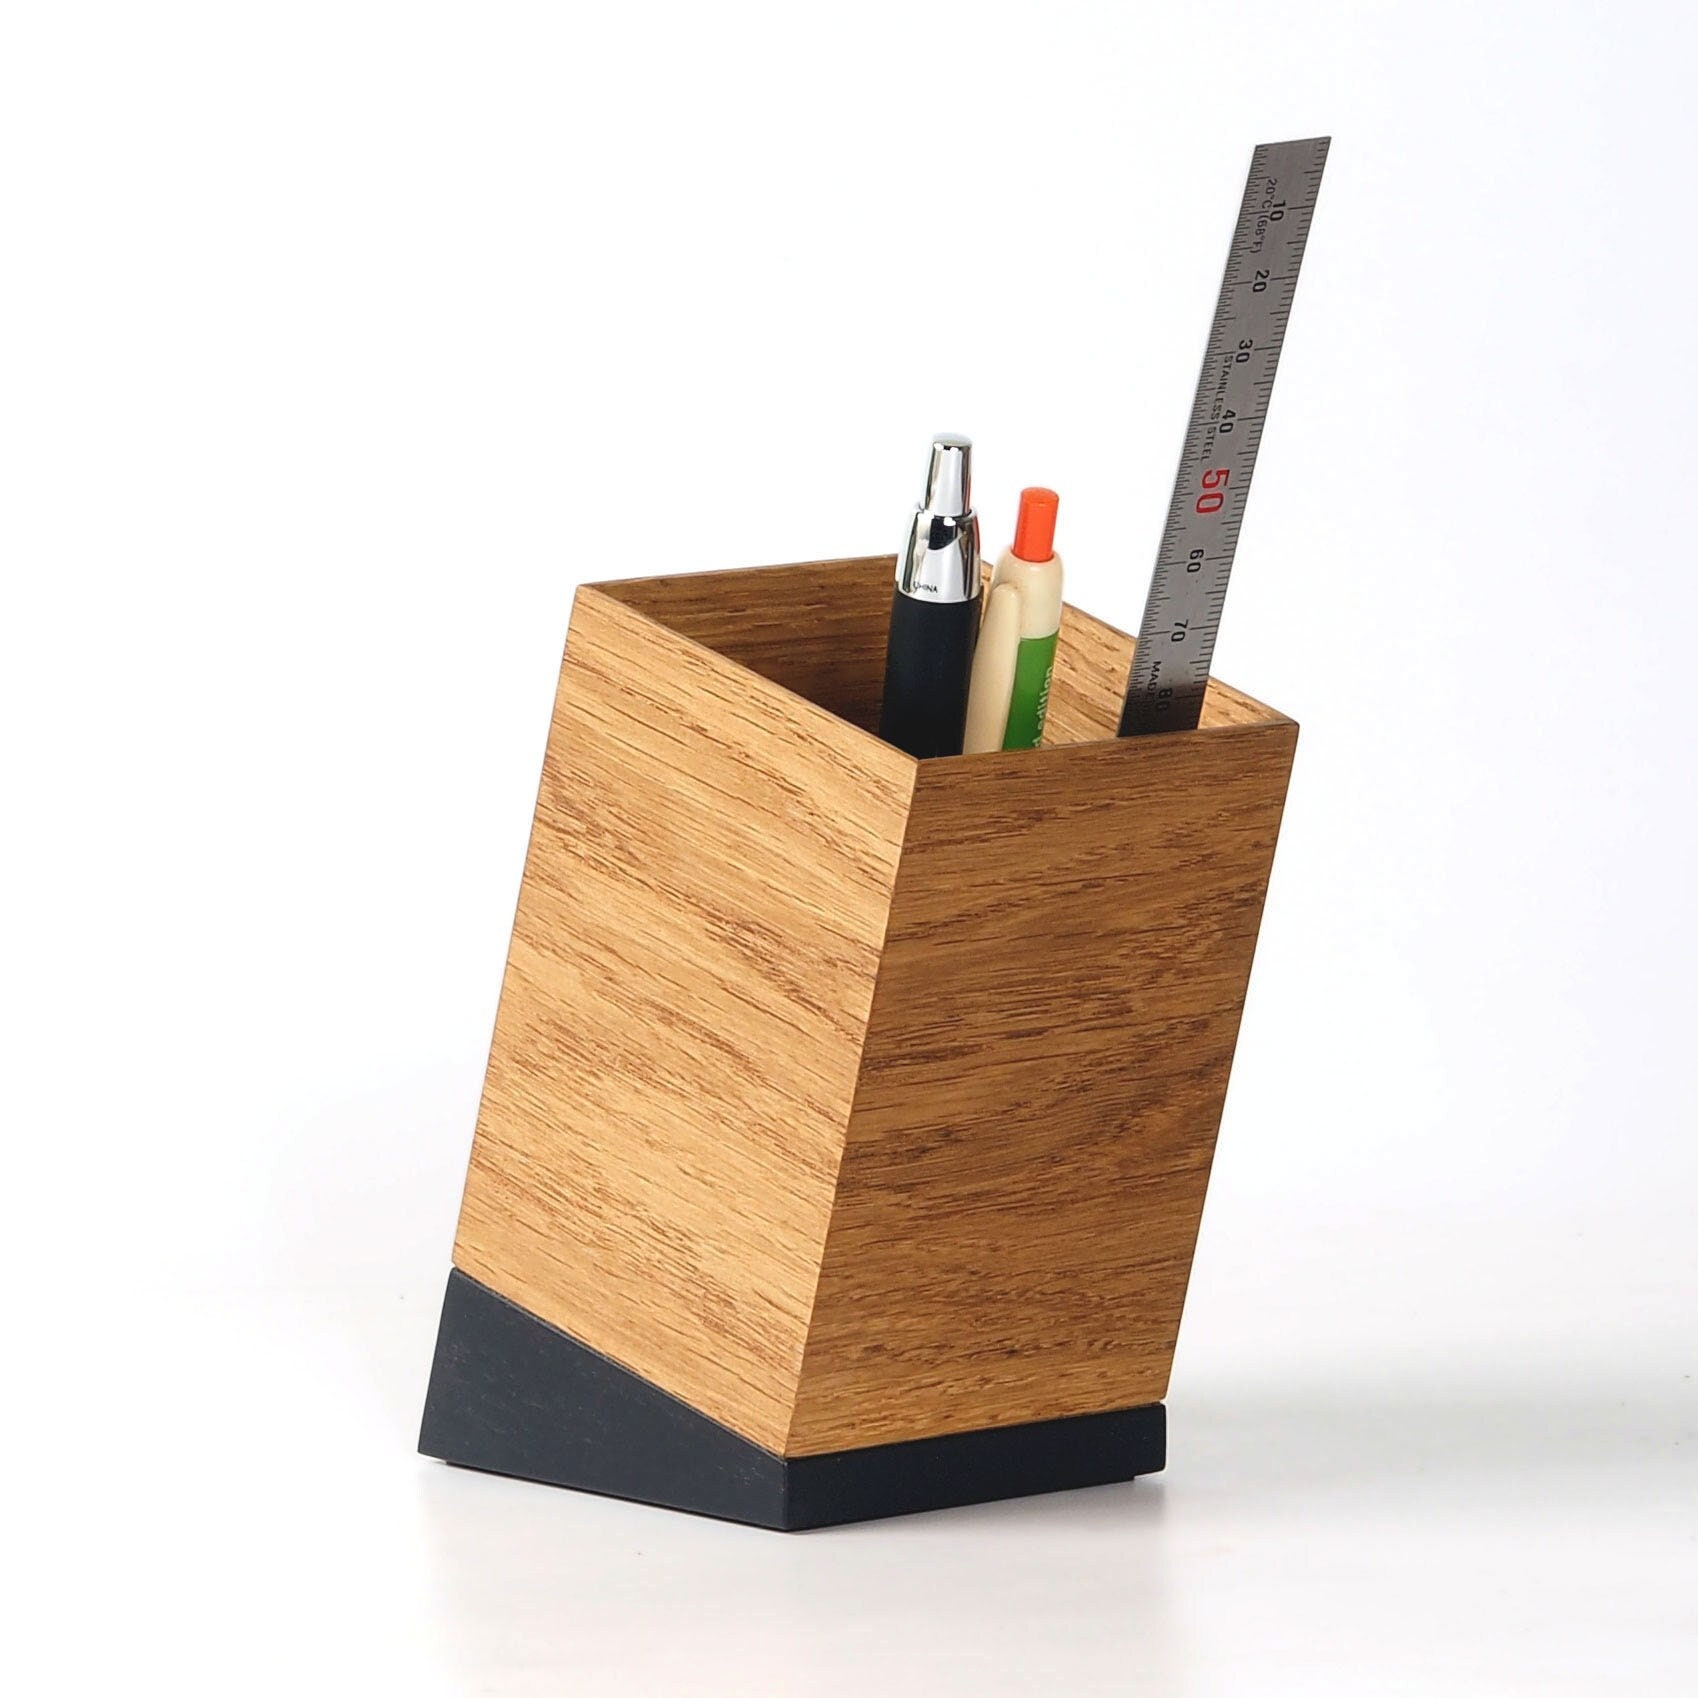 Wooden Pen Holder Lovely Office Desk Pencil Container Stationery Pencil  Holders Storage Box Wooden Pen Holder SQUARE